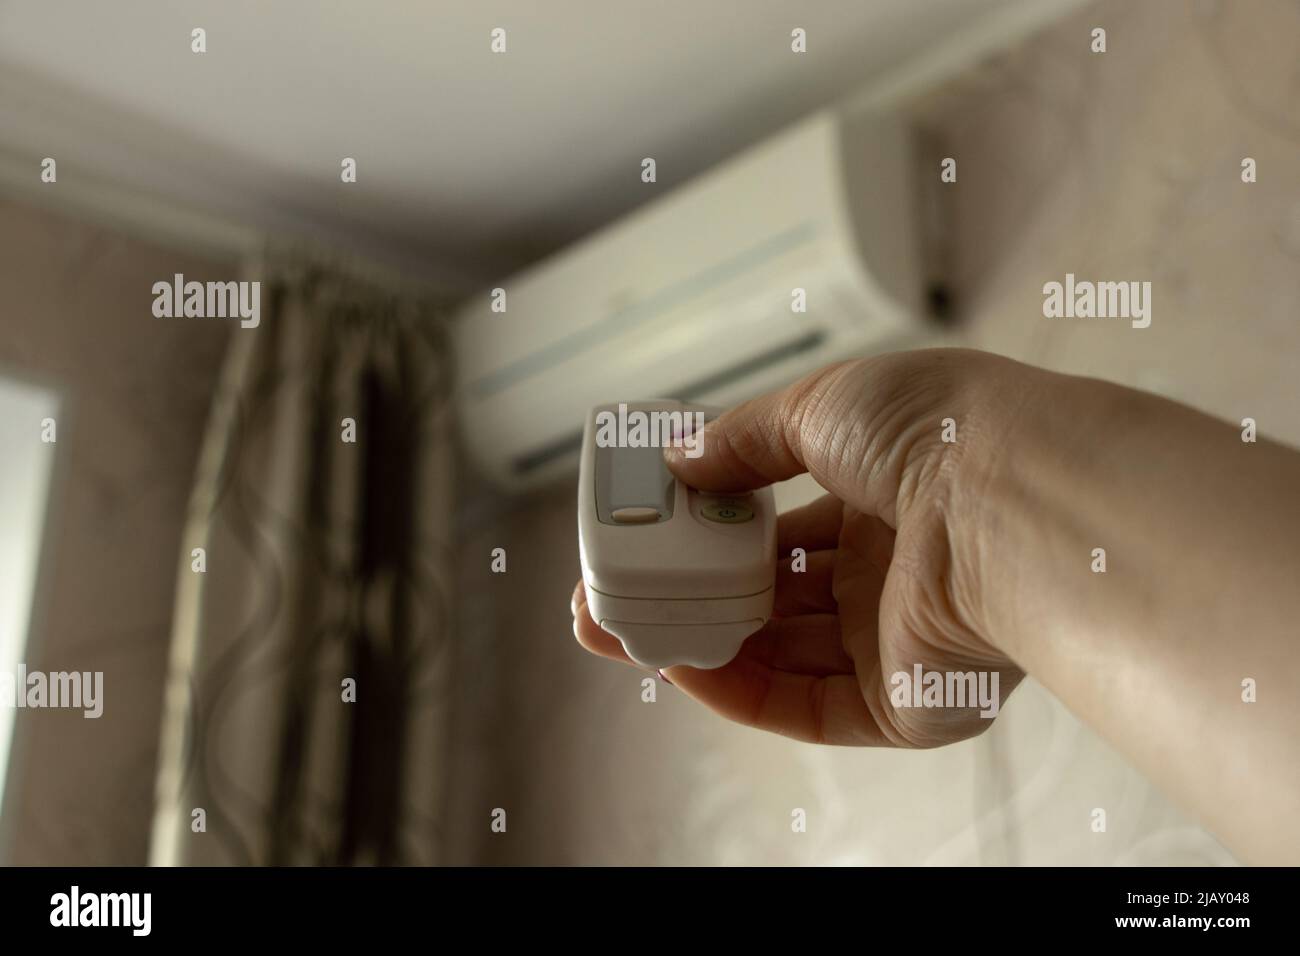 The remote control from the air conditioner in the girl's hand is directed to the air conditioner in the apartment, turn on the air conditioner, clima Stock Photo